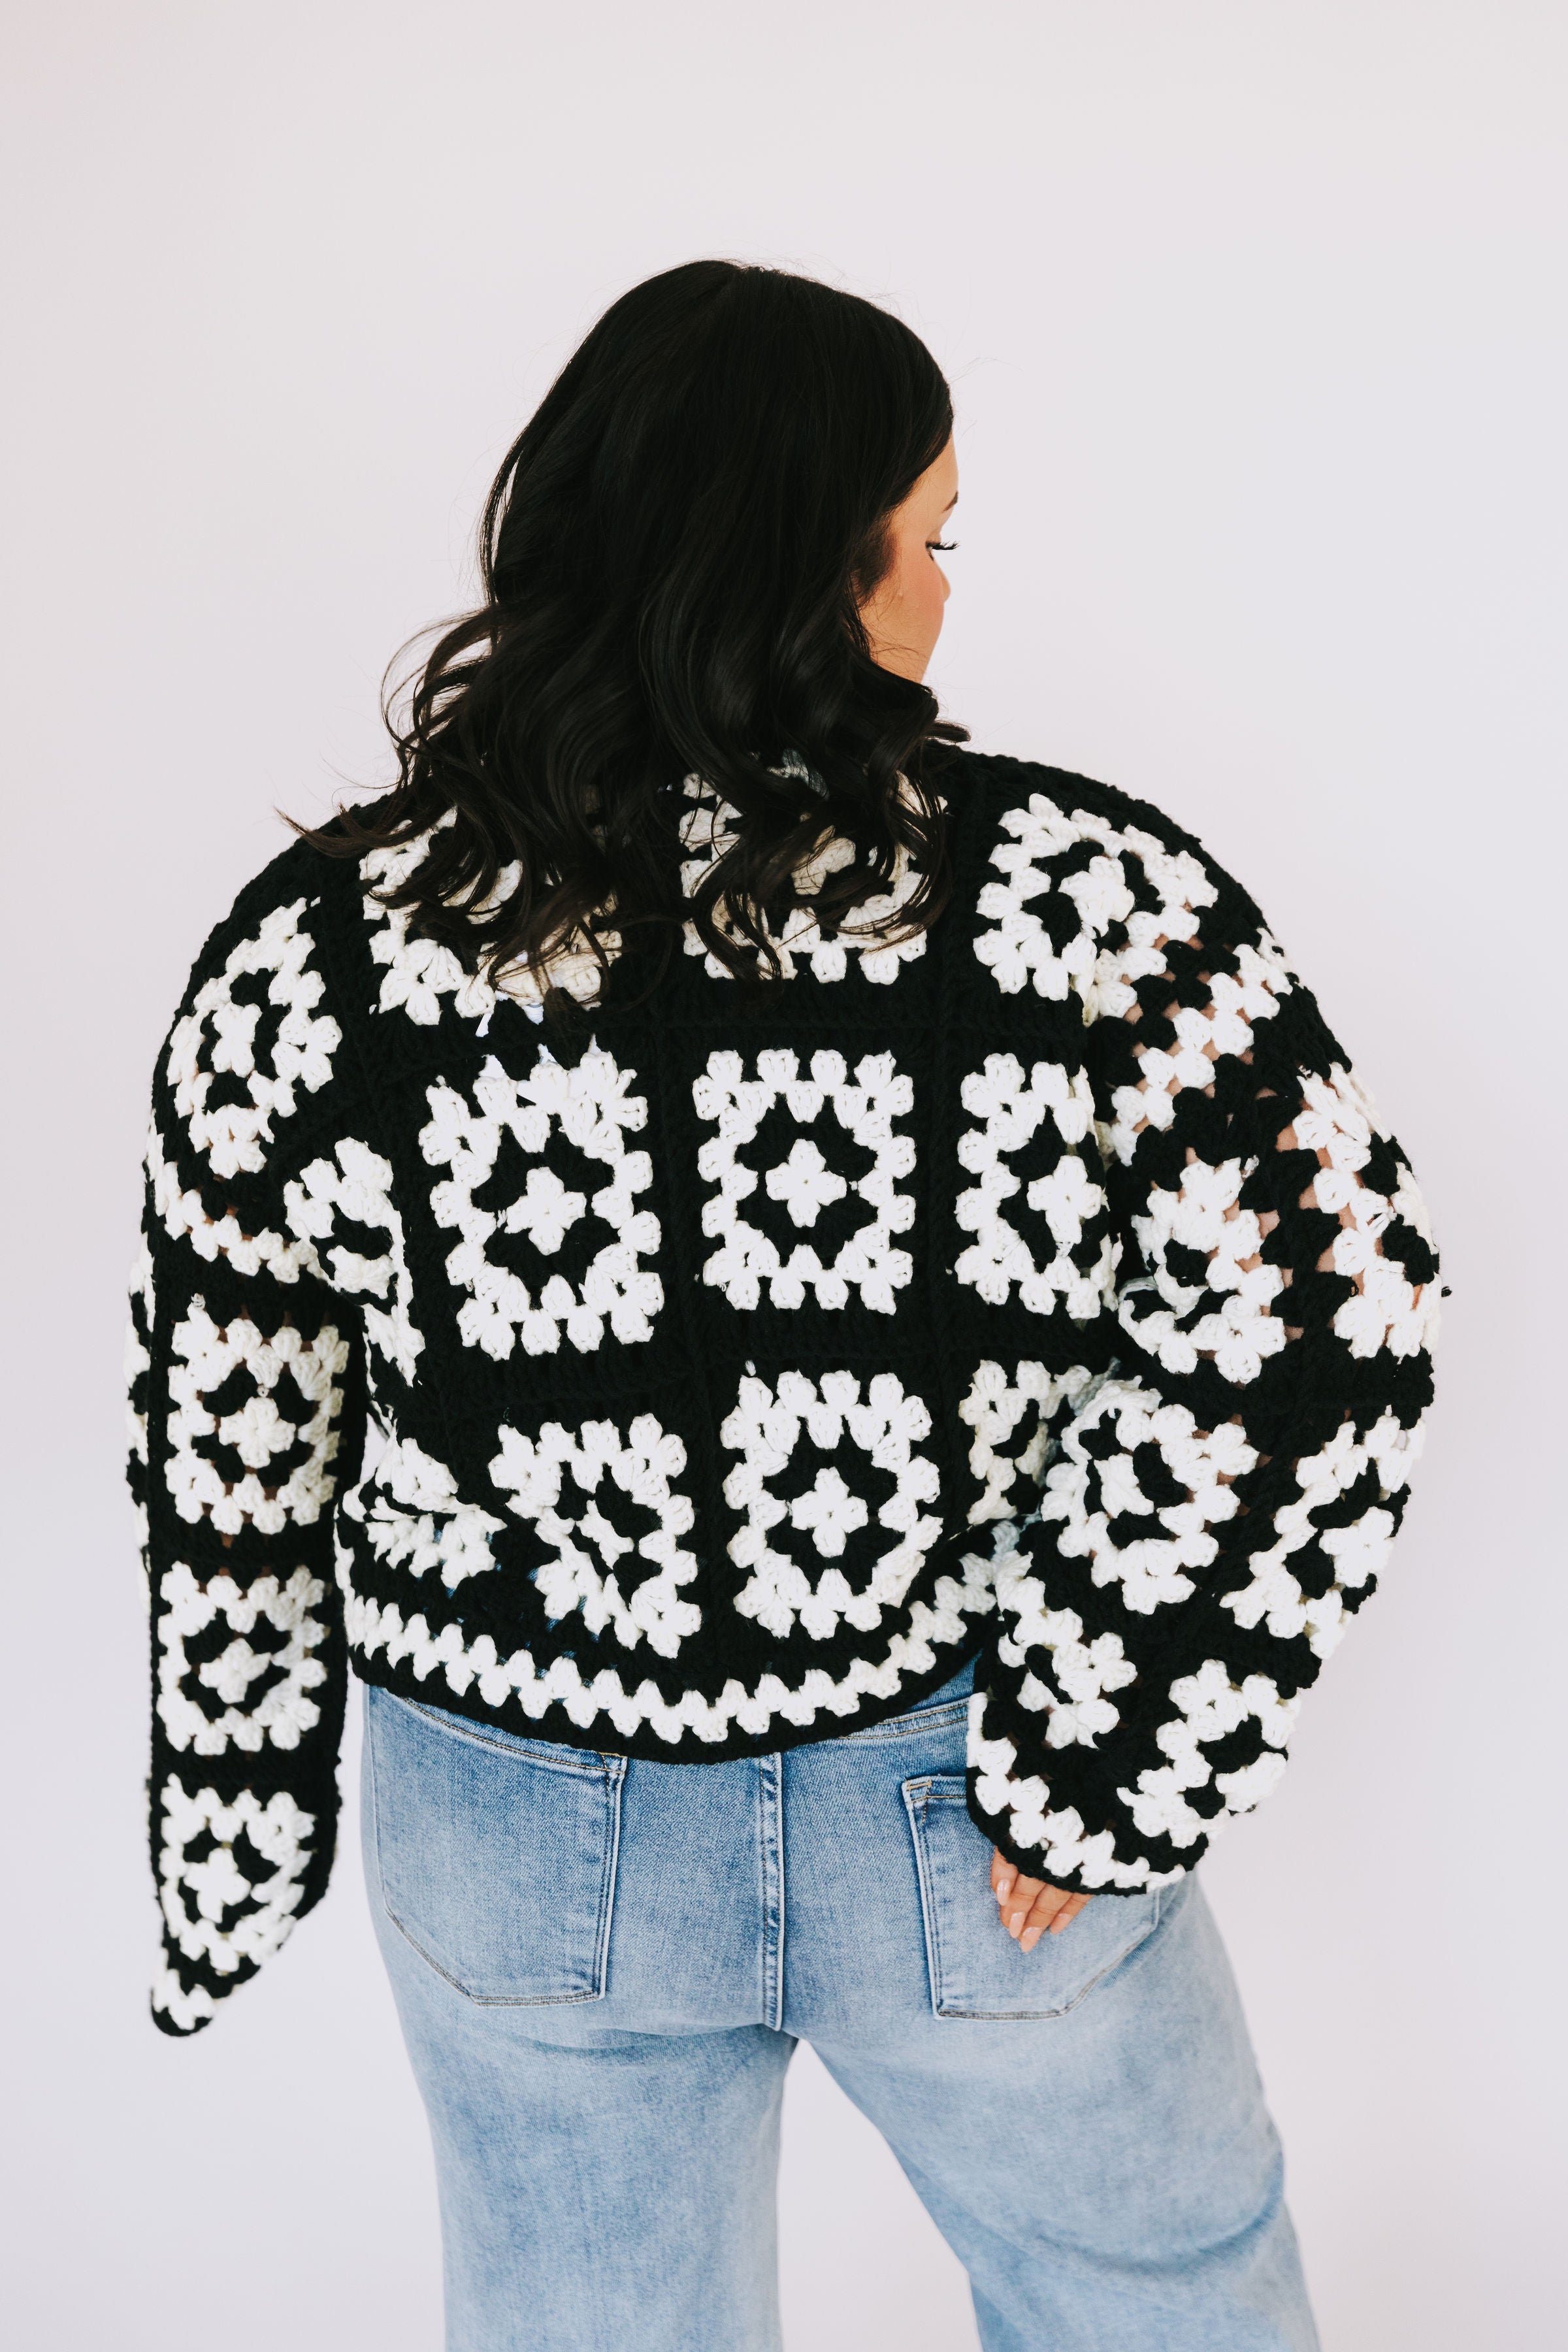 PLUS SIZE - All Squared Away Cardigan